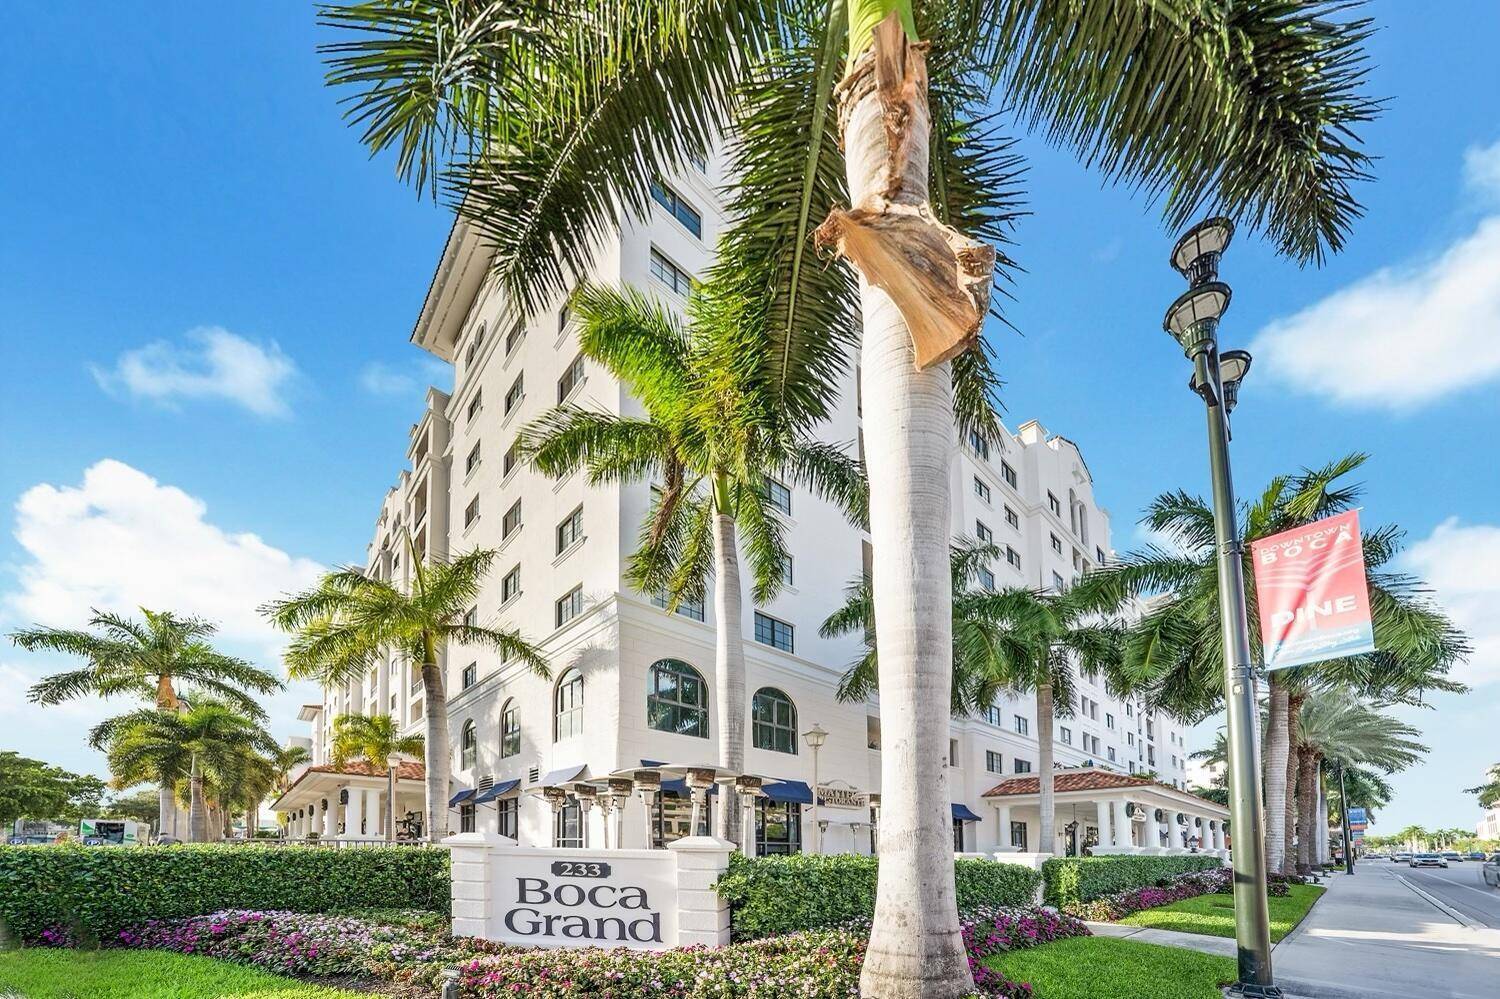 Live your Best life in Downtown Boca Raton.